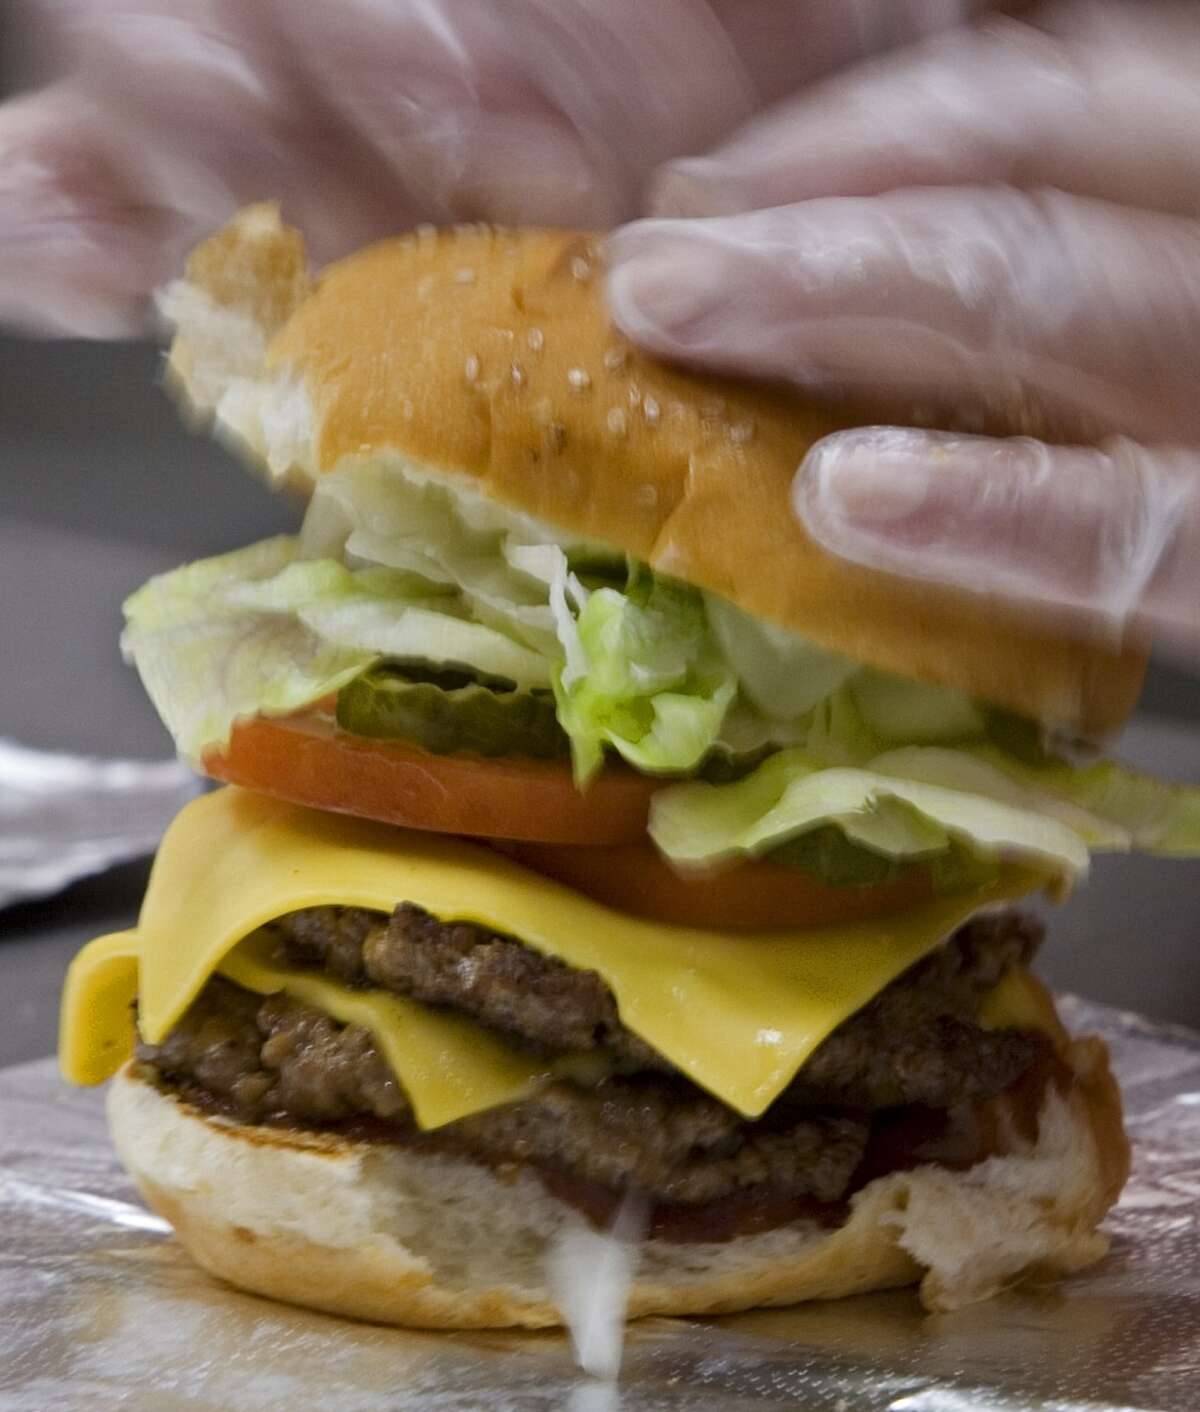 1. Five Guys Burgers and Fries, various locations. Visit website.